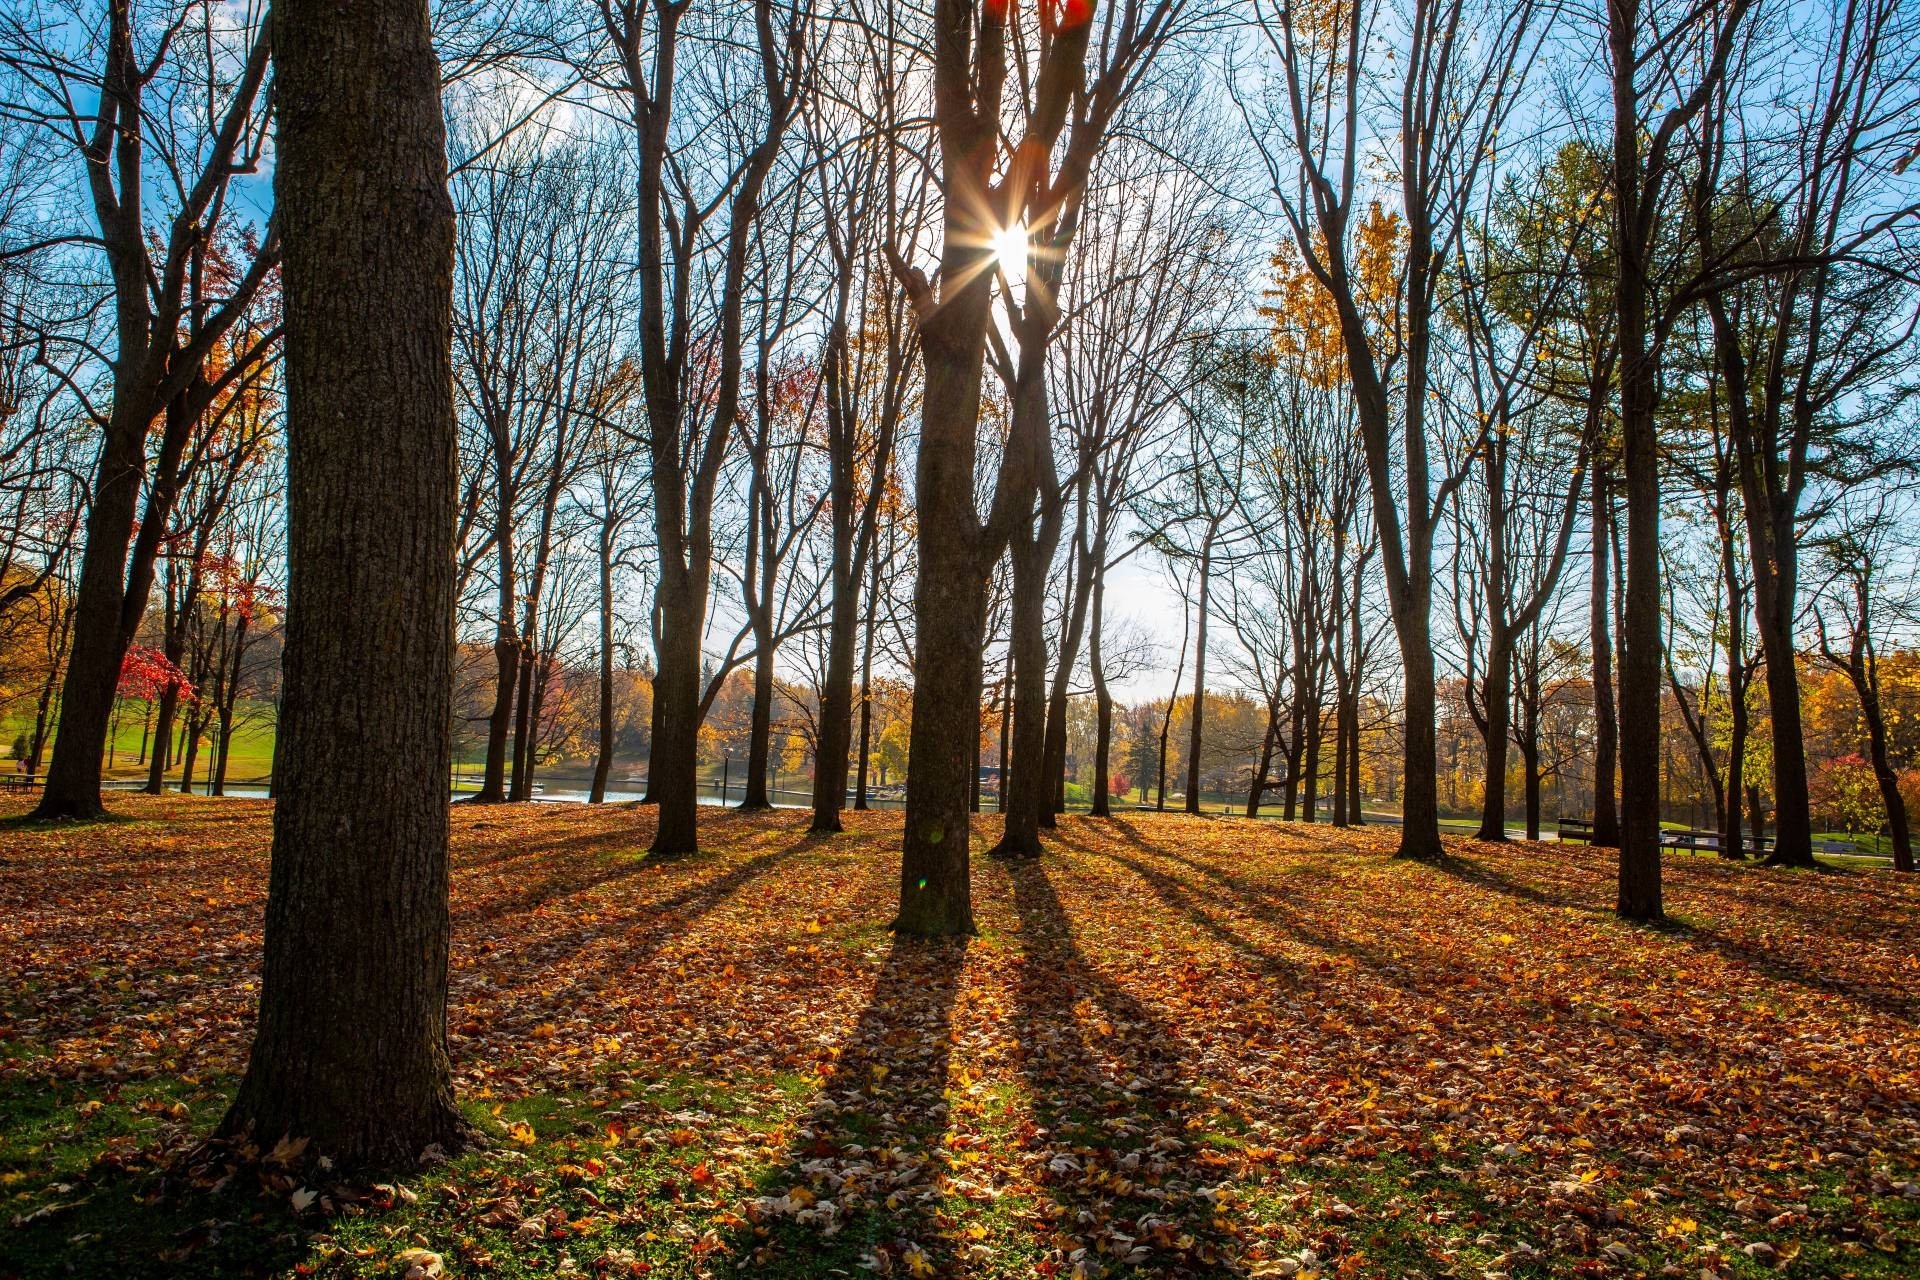 A photo of the trees and leaf-strewn ground on Mount Royal on a late fall afternoon